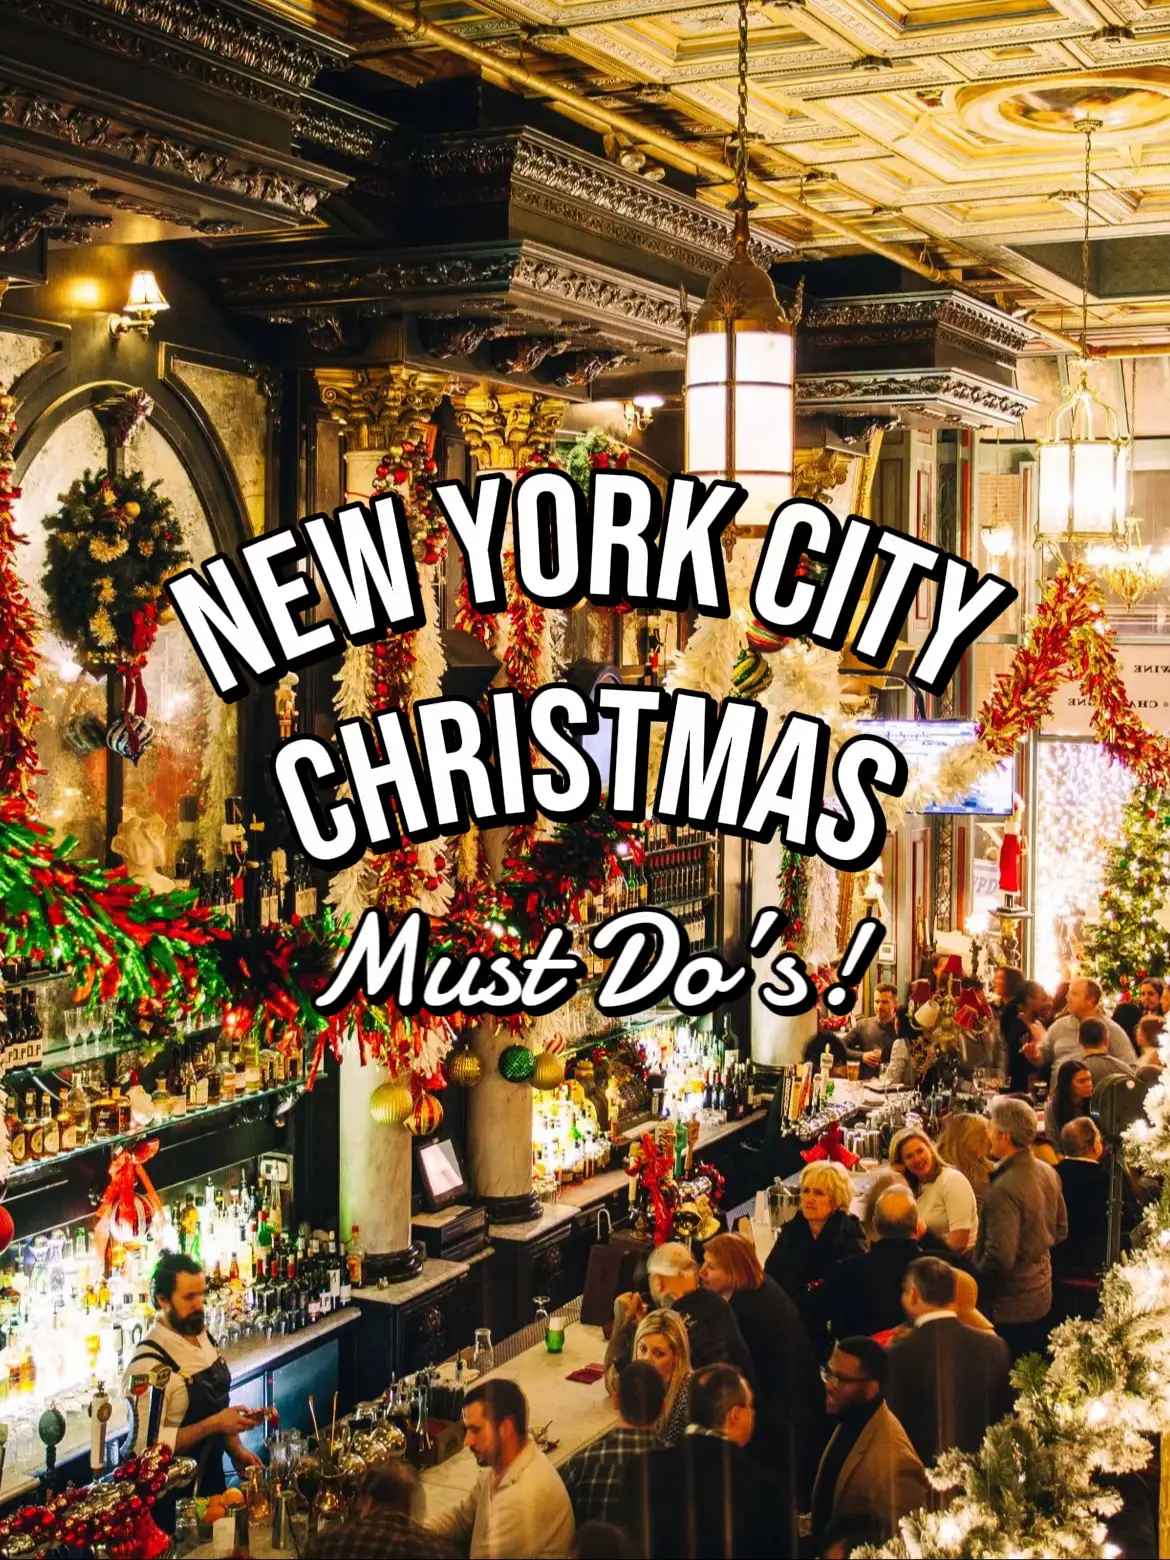 NYC CHRISTMAS MUST DOS FROM A LOCAL🎄's images